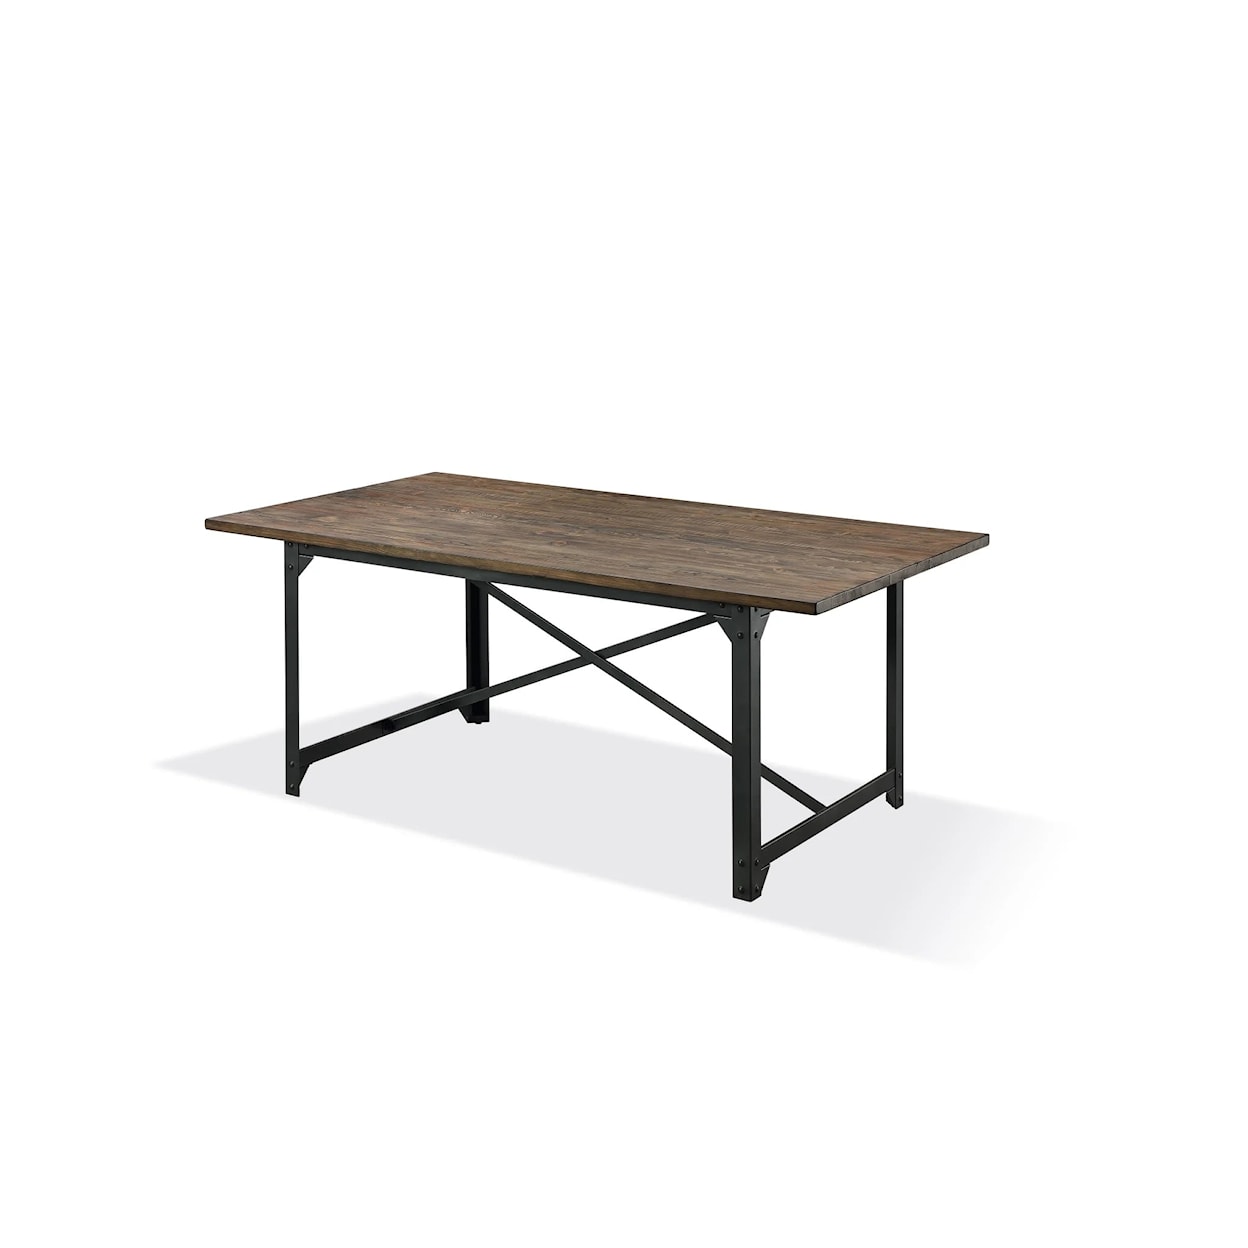 Modus International Dubois Reclaimed Wood and Metal Dining Table